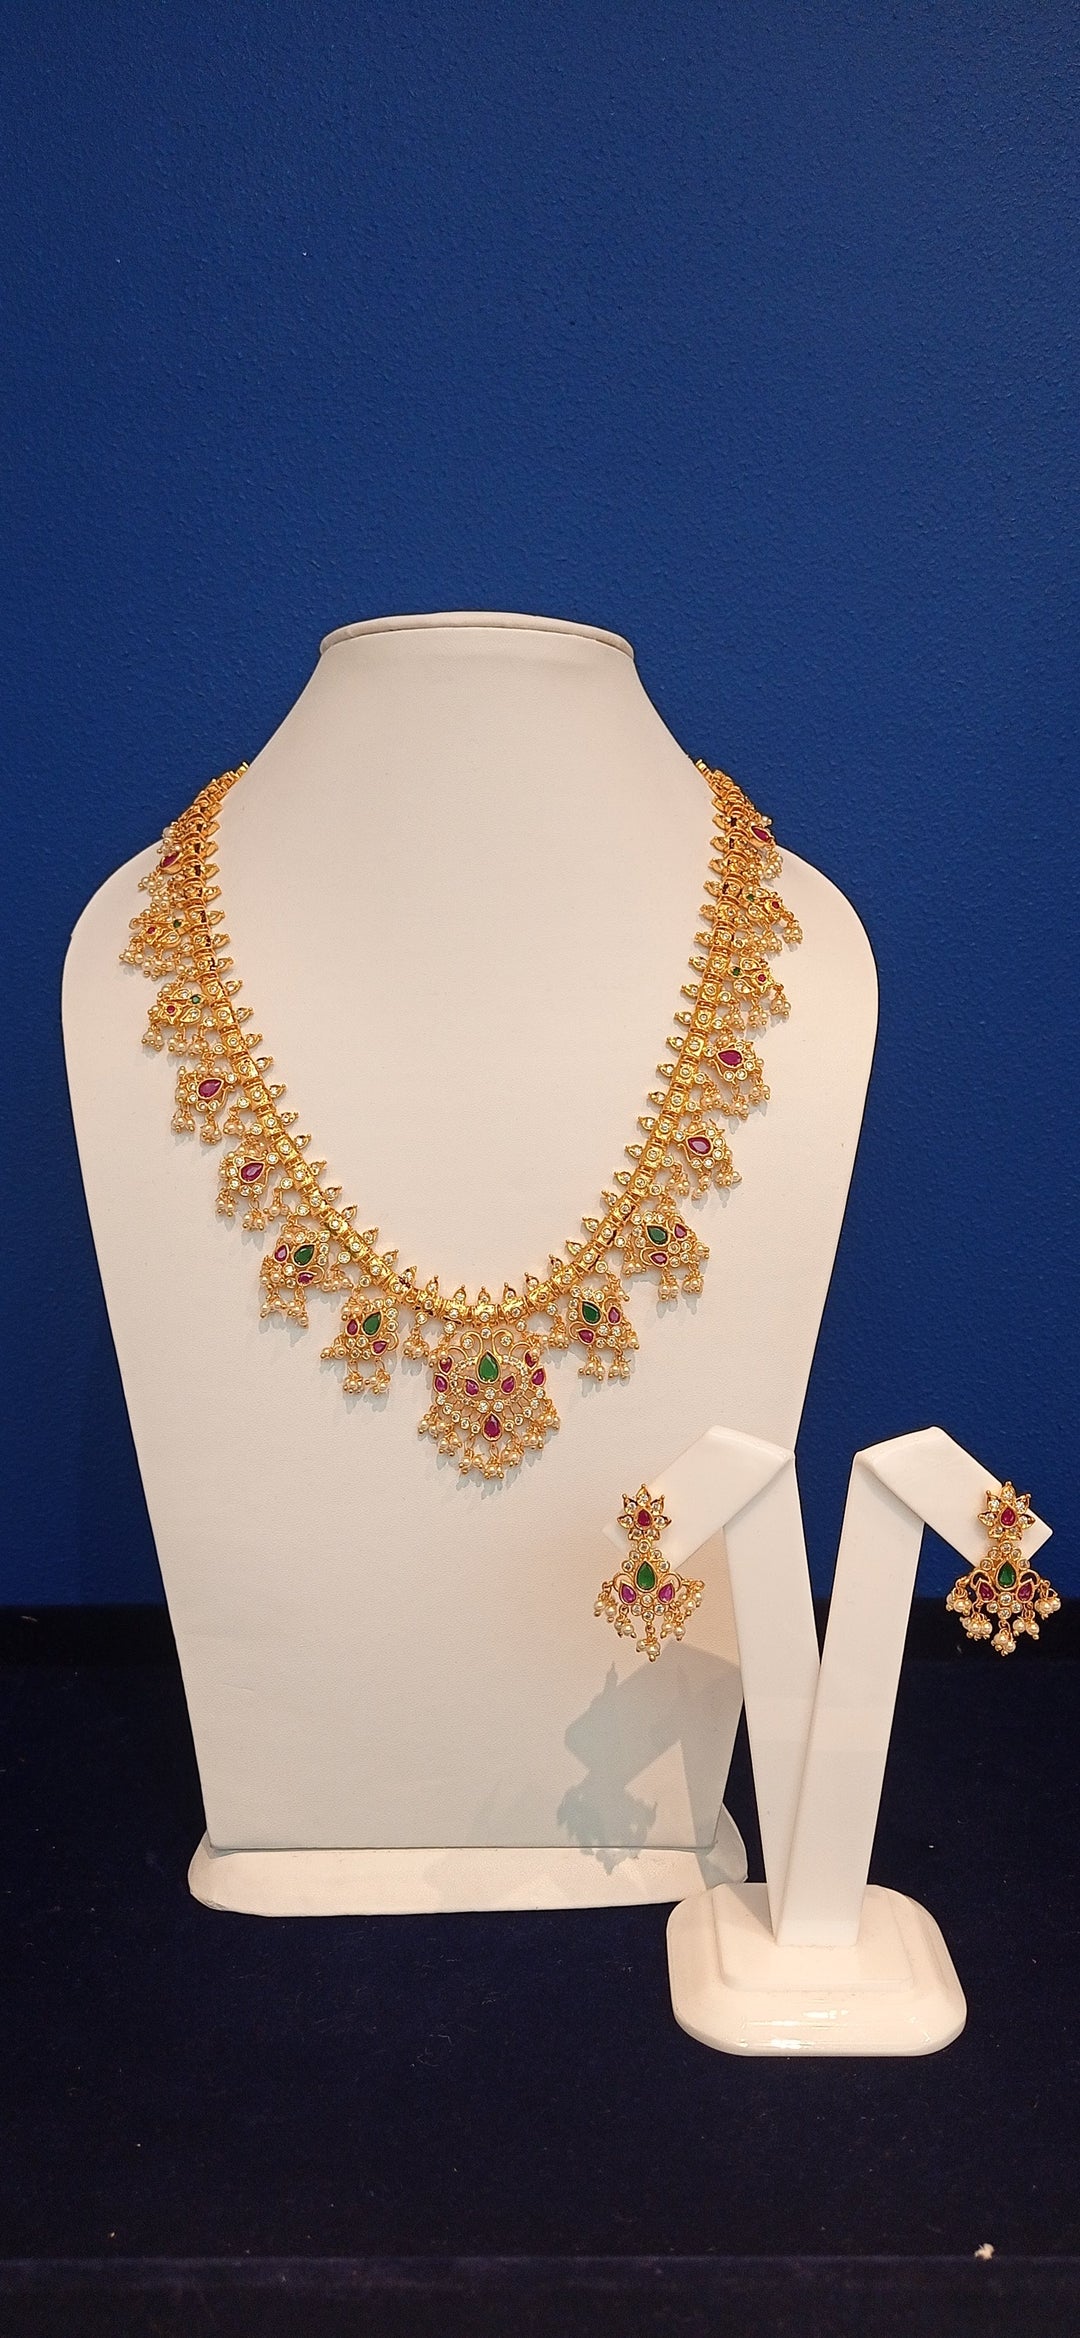 Subhadra Delicate Imitation Gold, Ruby and Emerald Necklace and Earrings Set